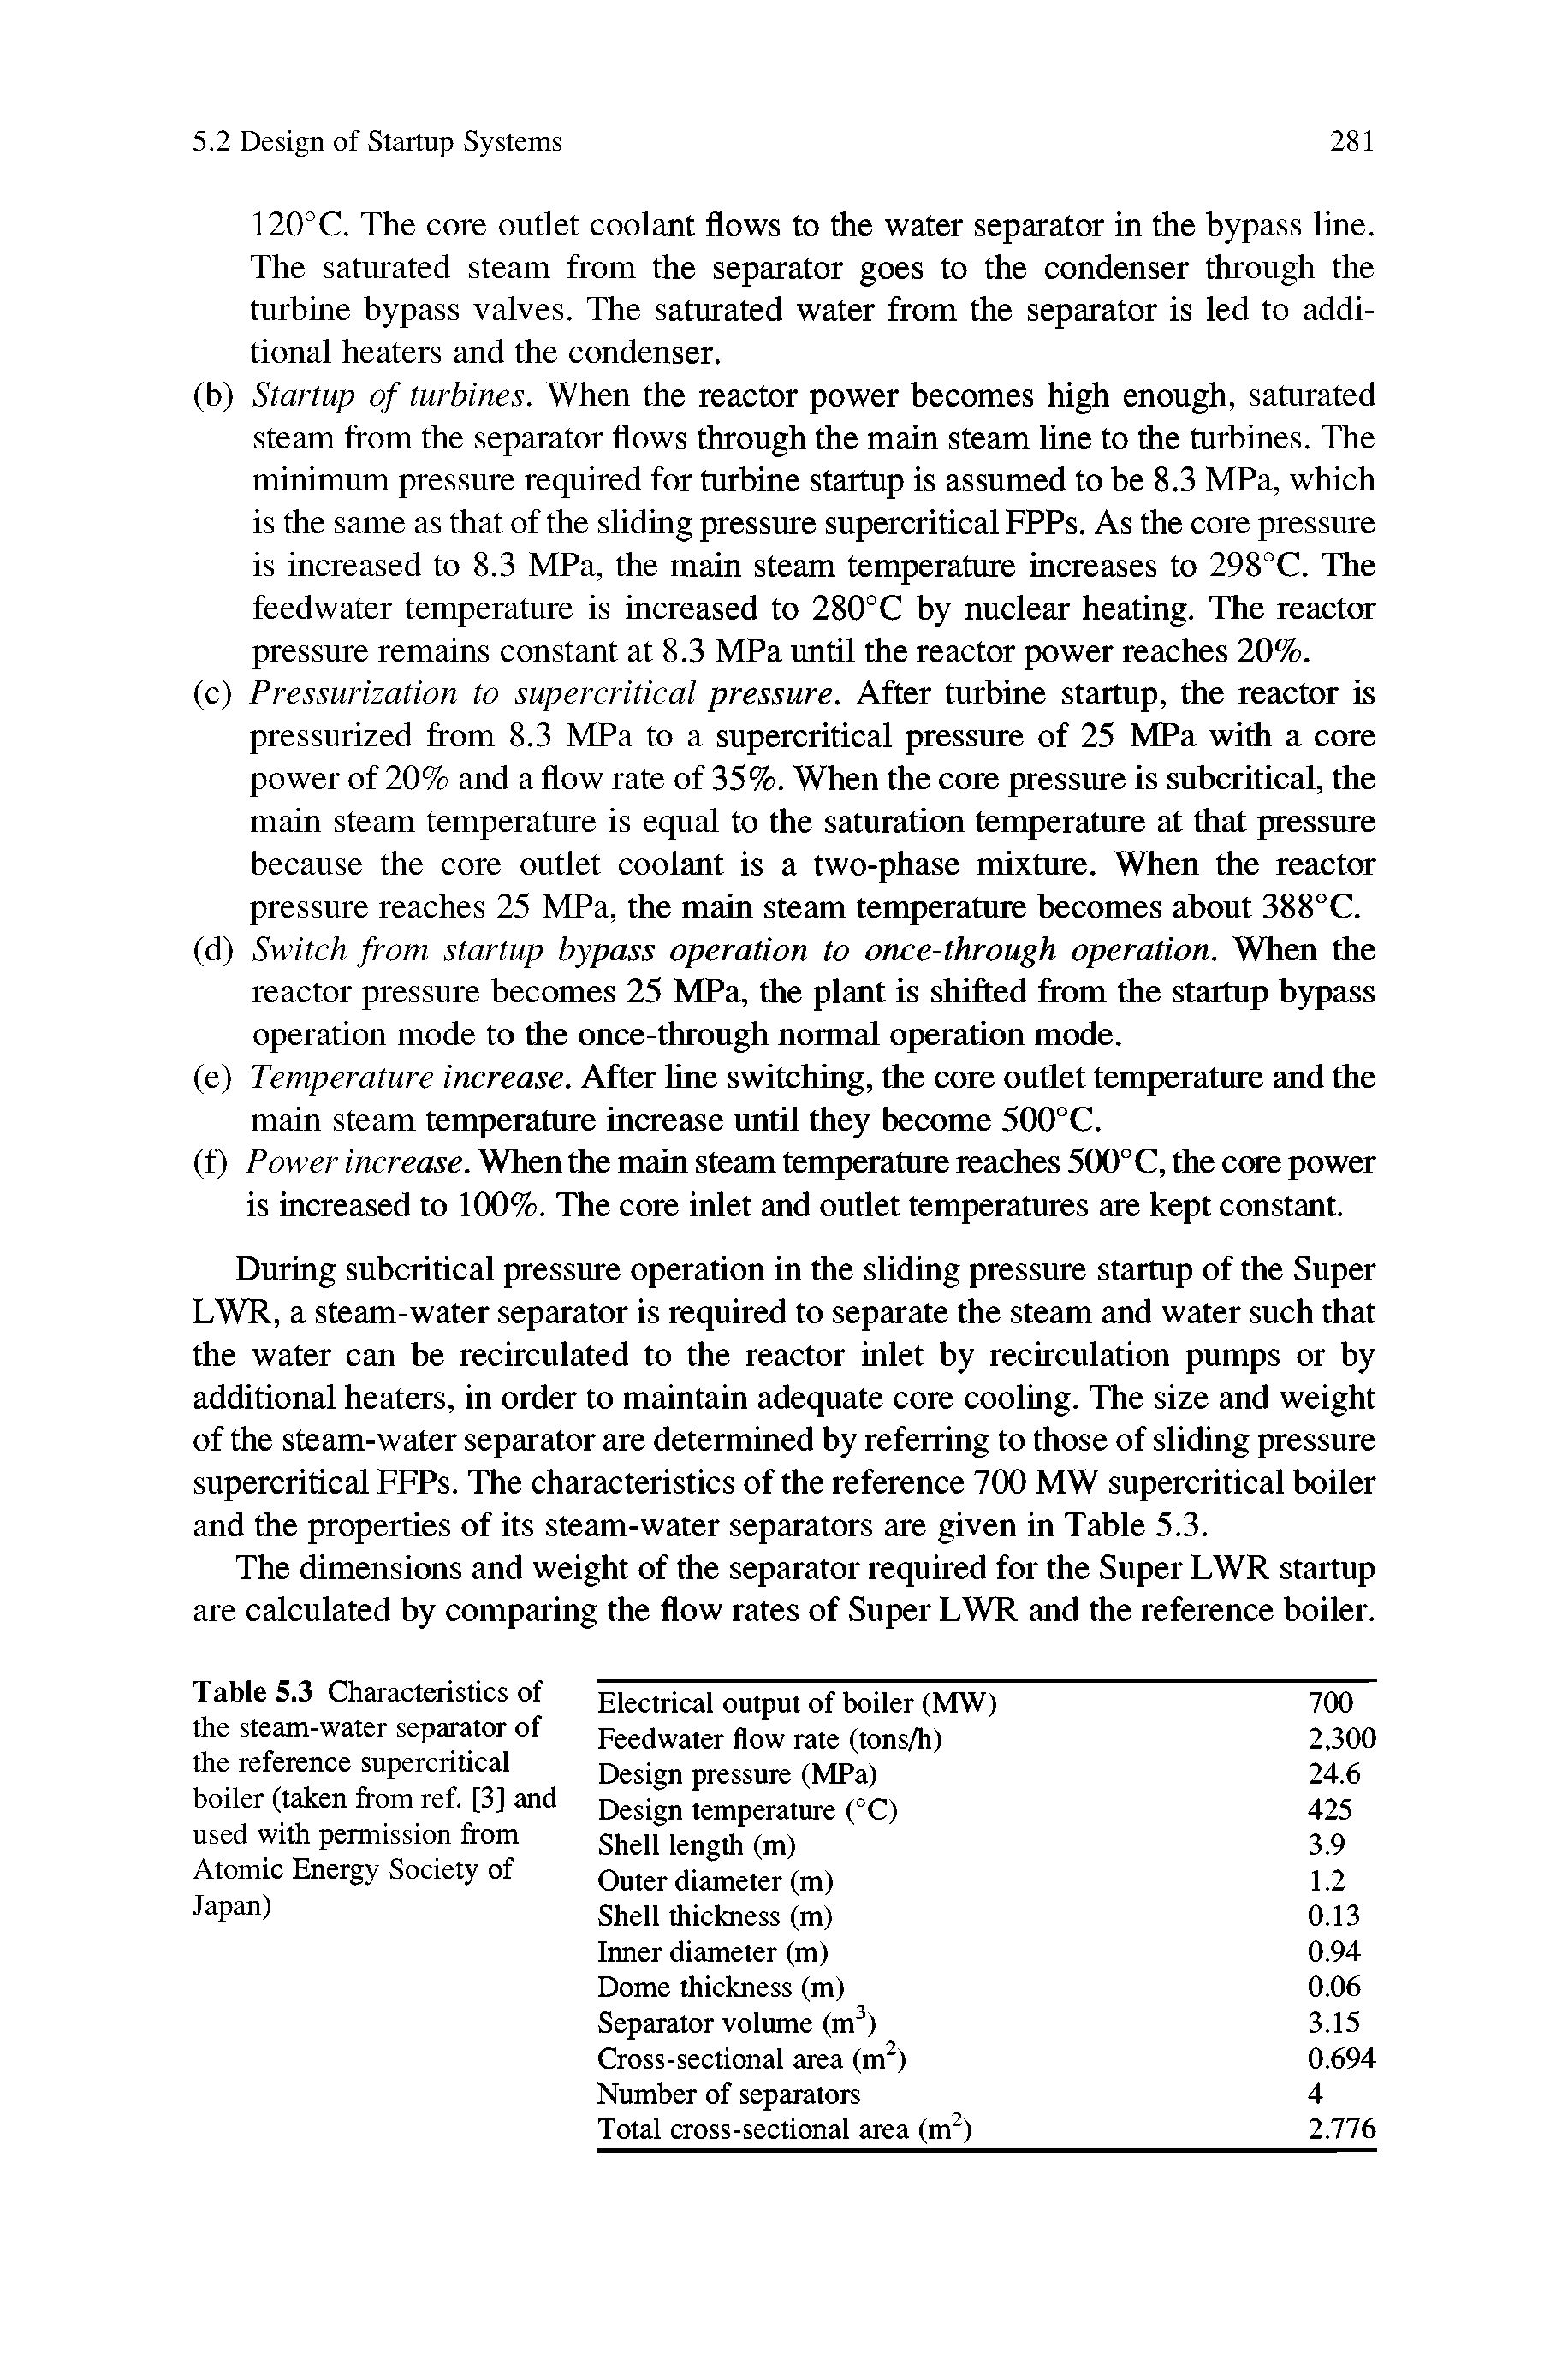 Table 5.3 Characteristics of the steam-water separator of the reference supercritical boiler (taken from ref. [3] and used with permission from Atomic Energy Society of Japan)...